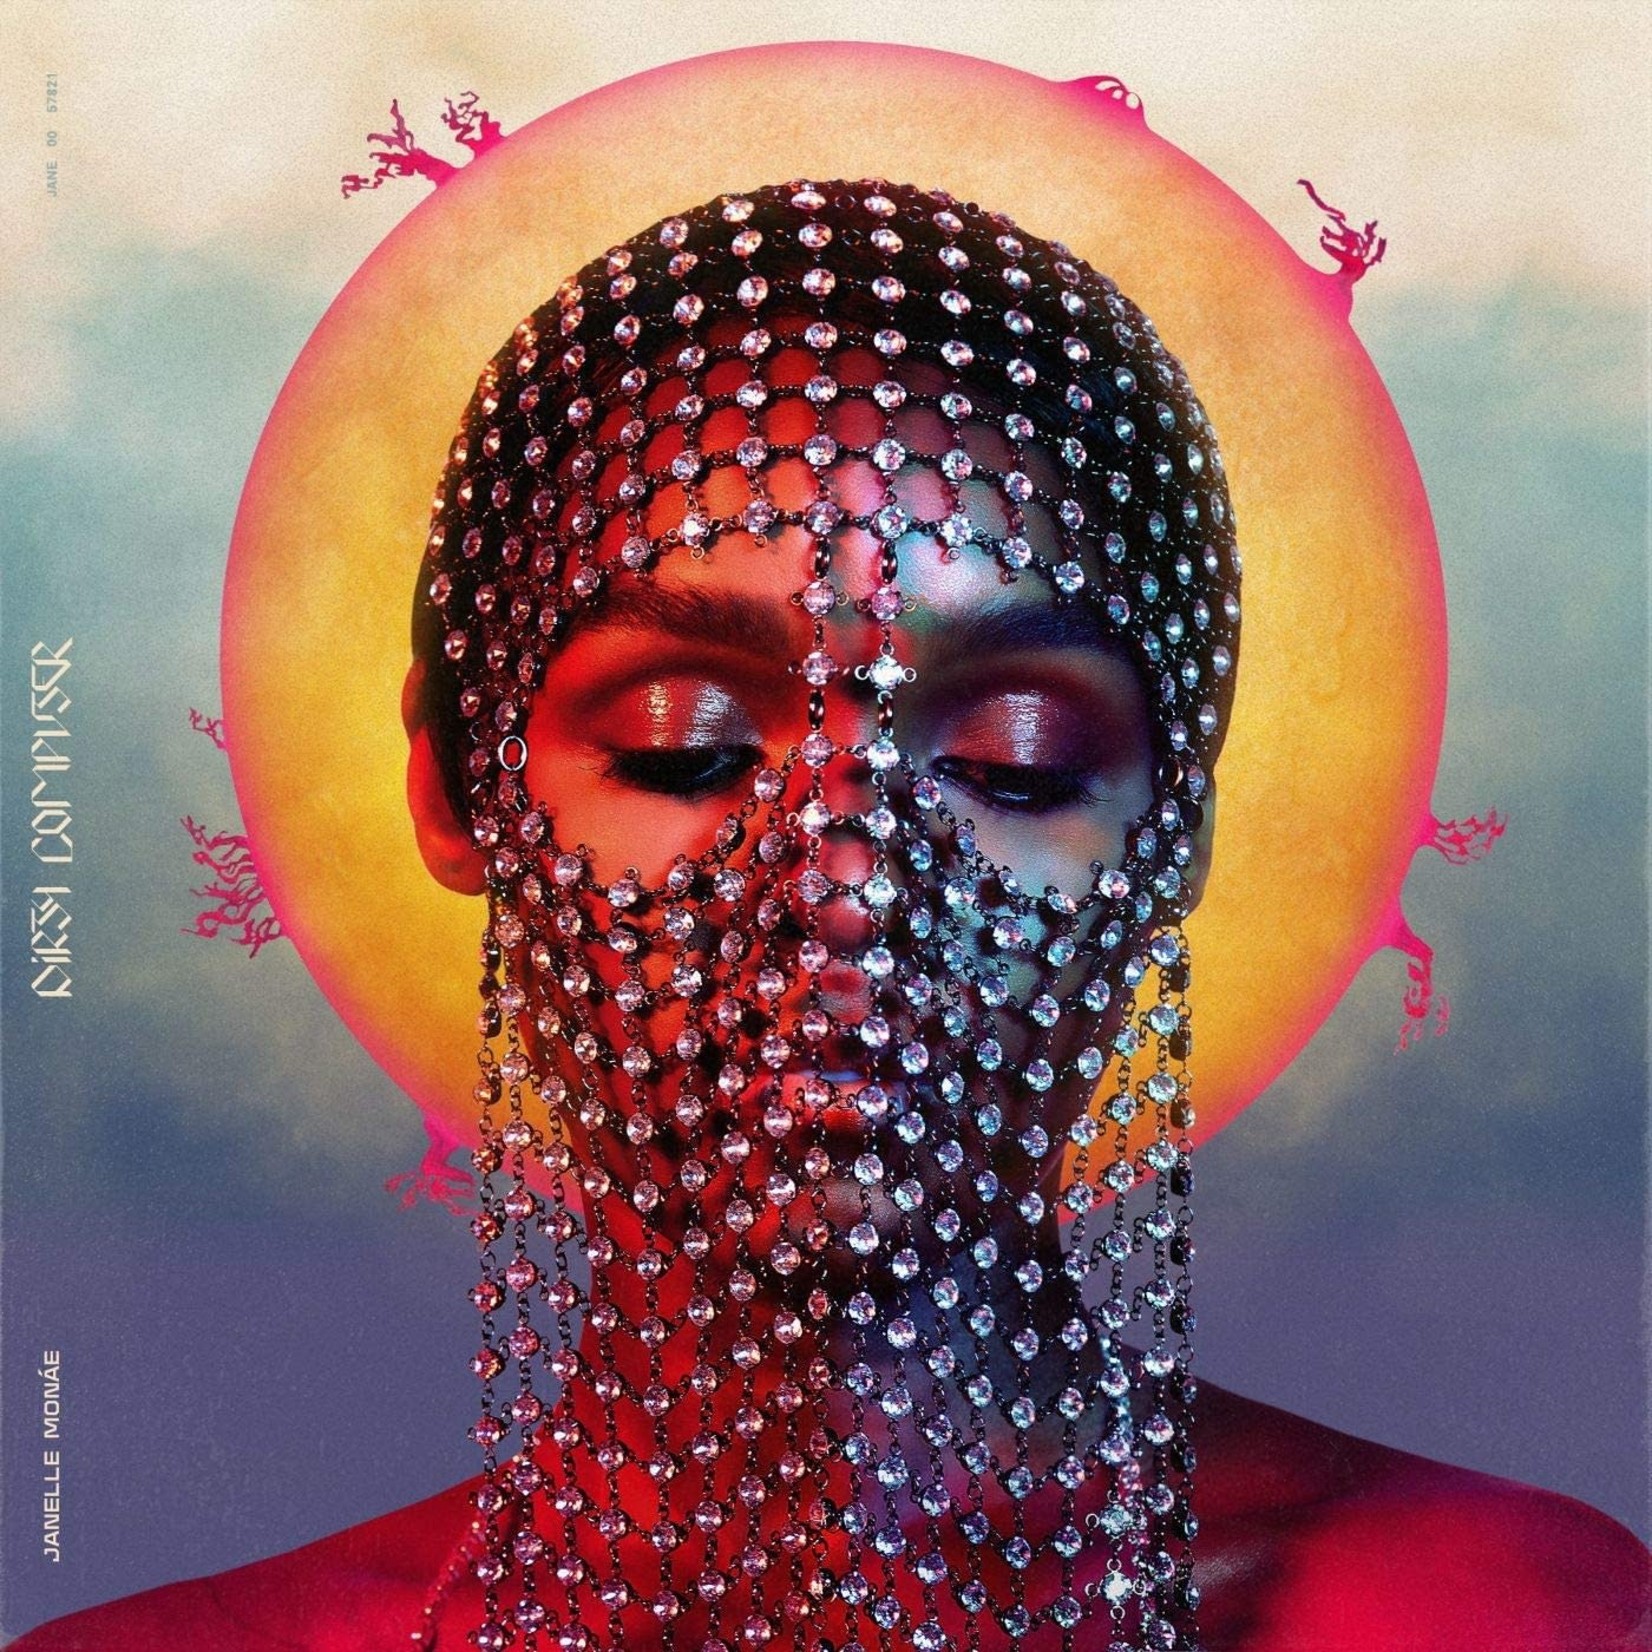 Janelle Monae - Dirty Computer [CD]